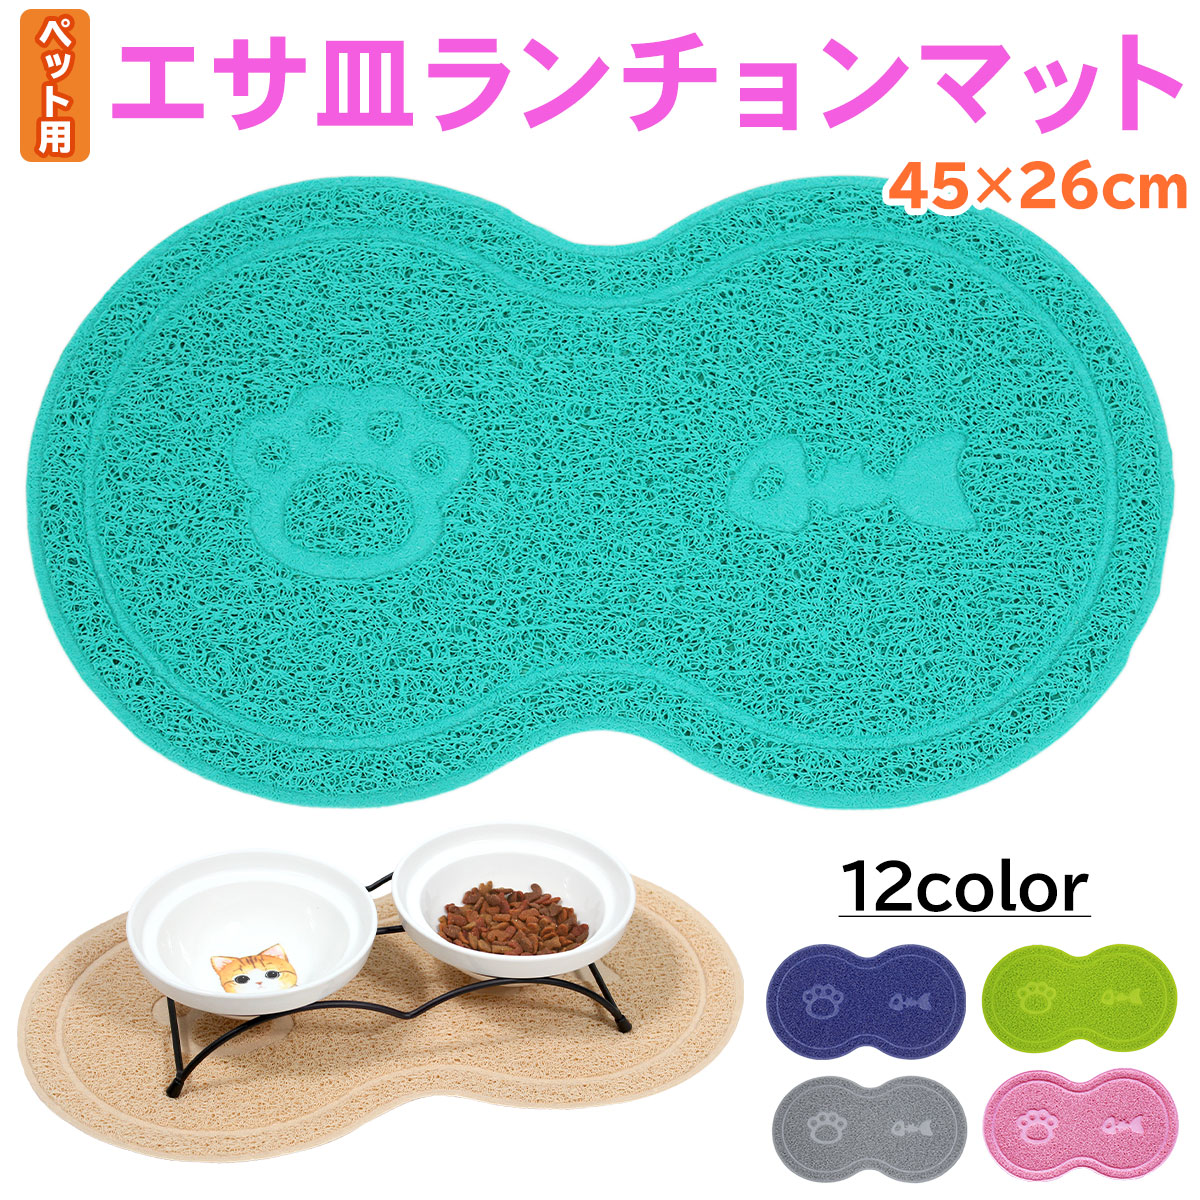 e. plate mat place mat . meal mat dog cat pet feed plate bait plate feed inserting slip prevention toilet mat - type 